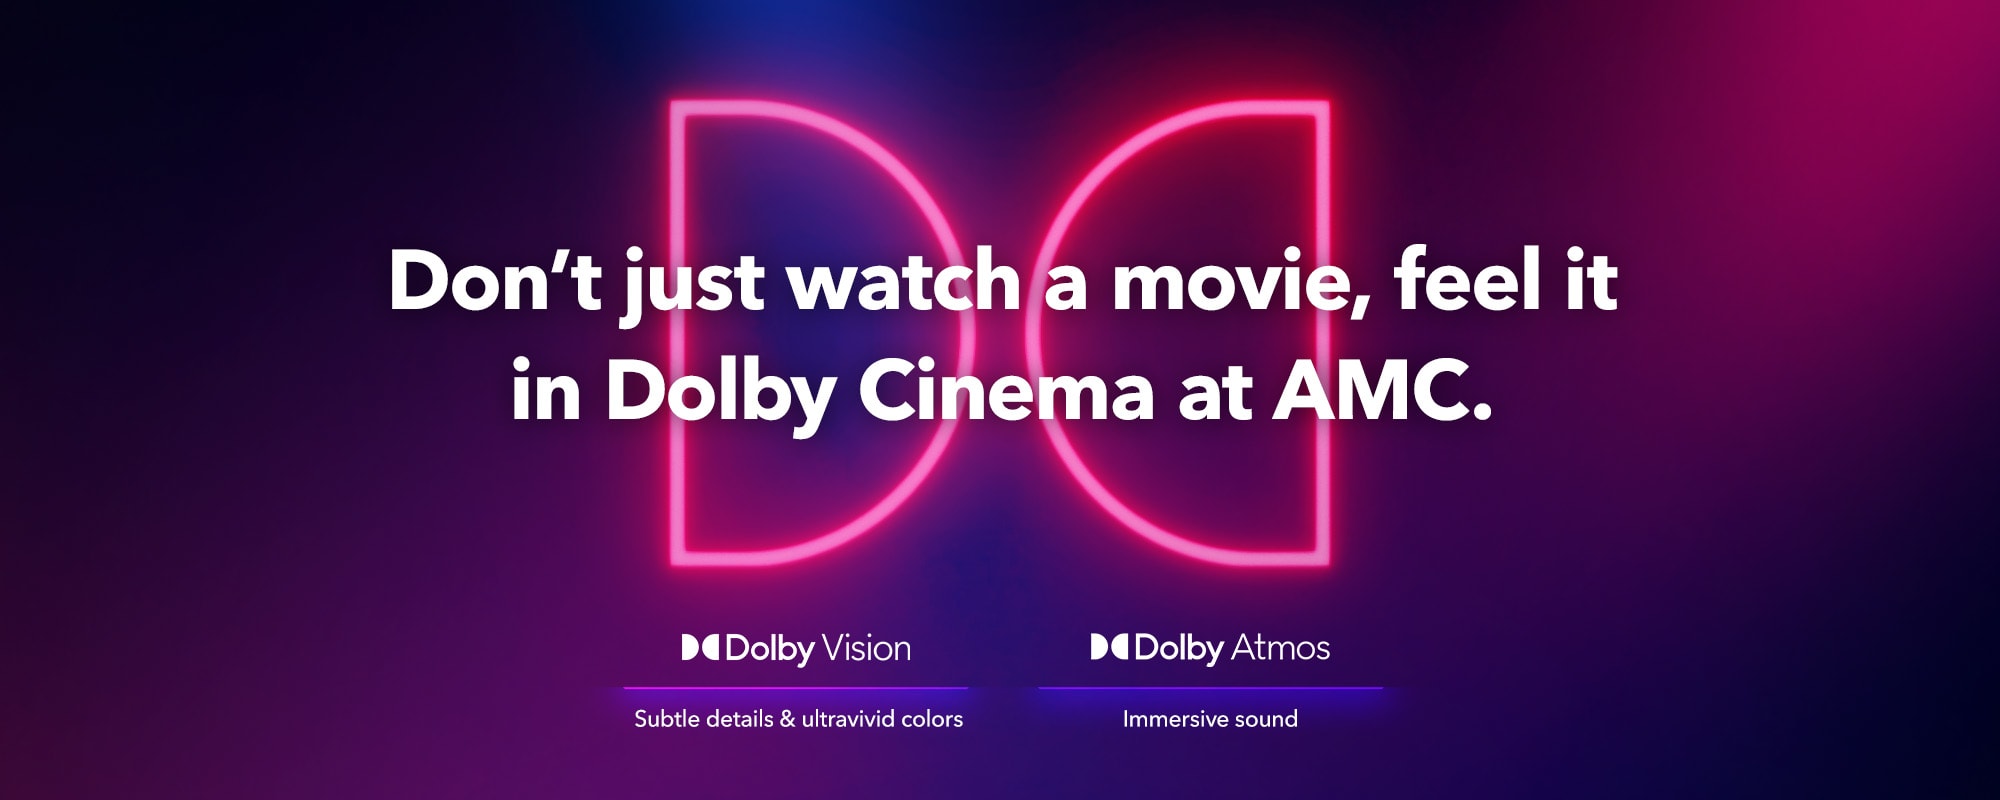 Don't just watch a movie, feel it in Dolby Cinema at AMC